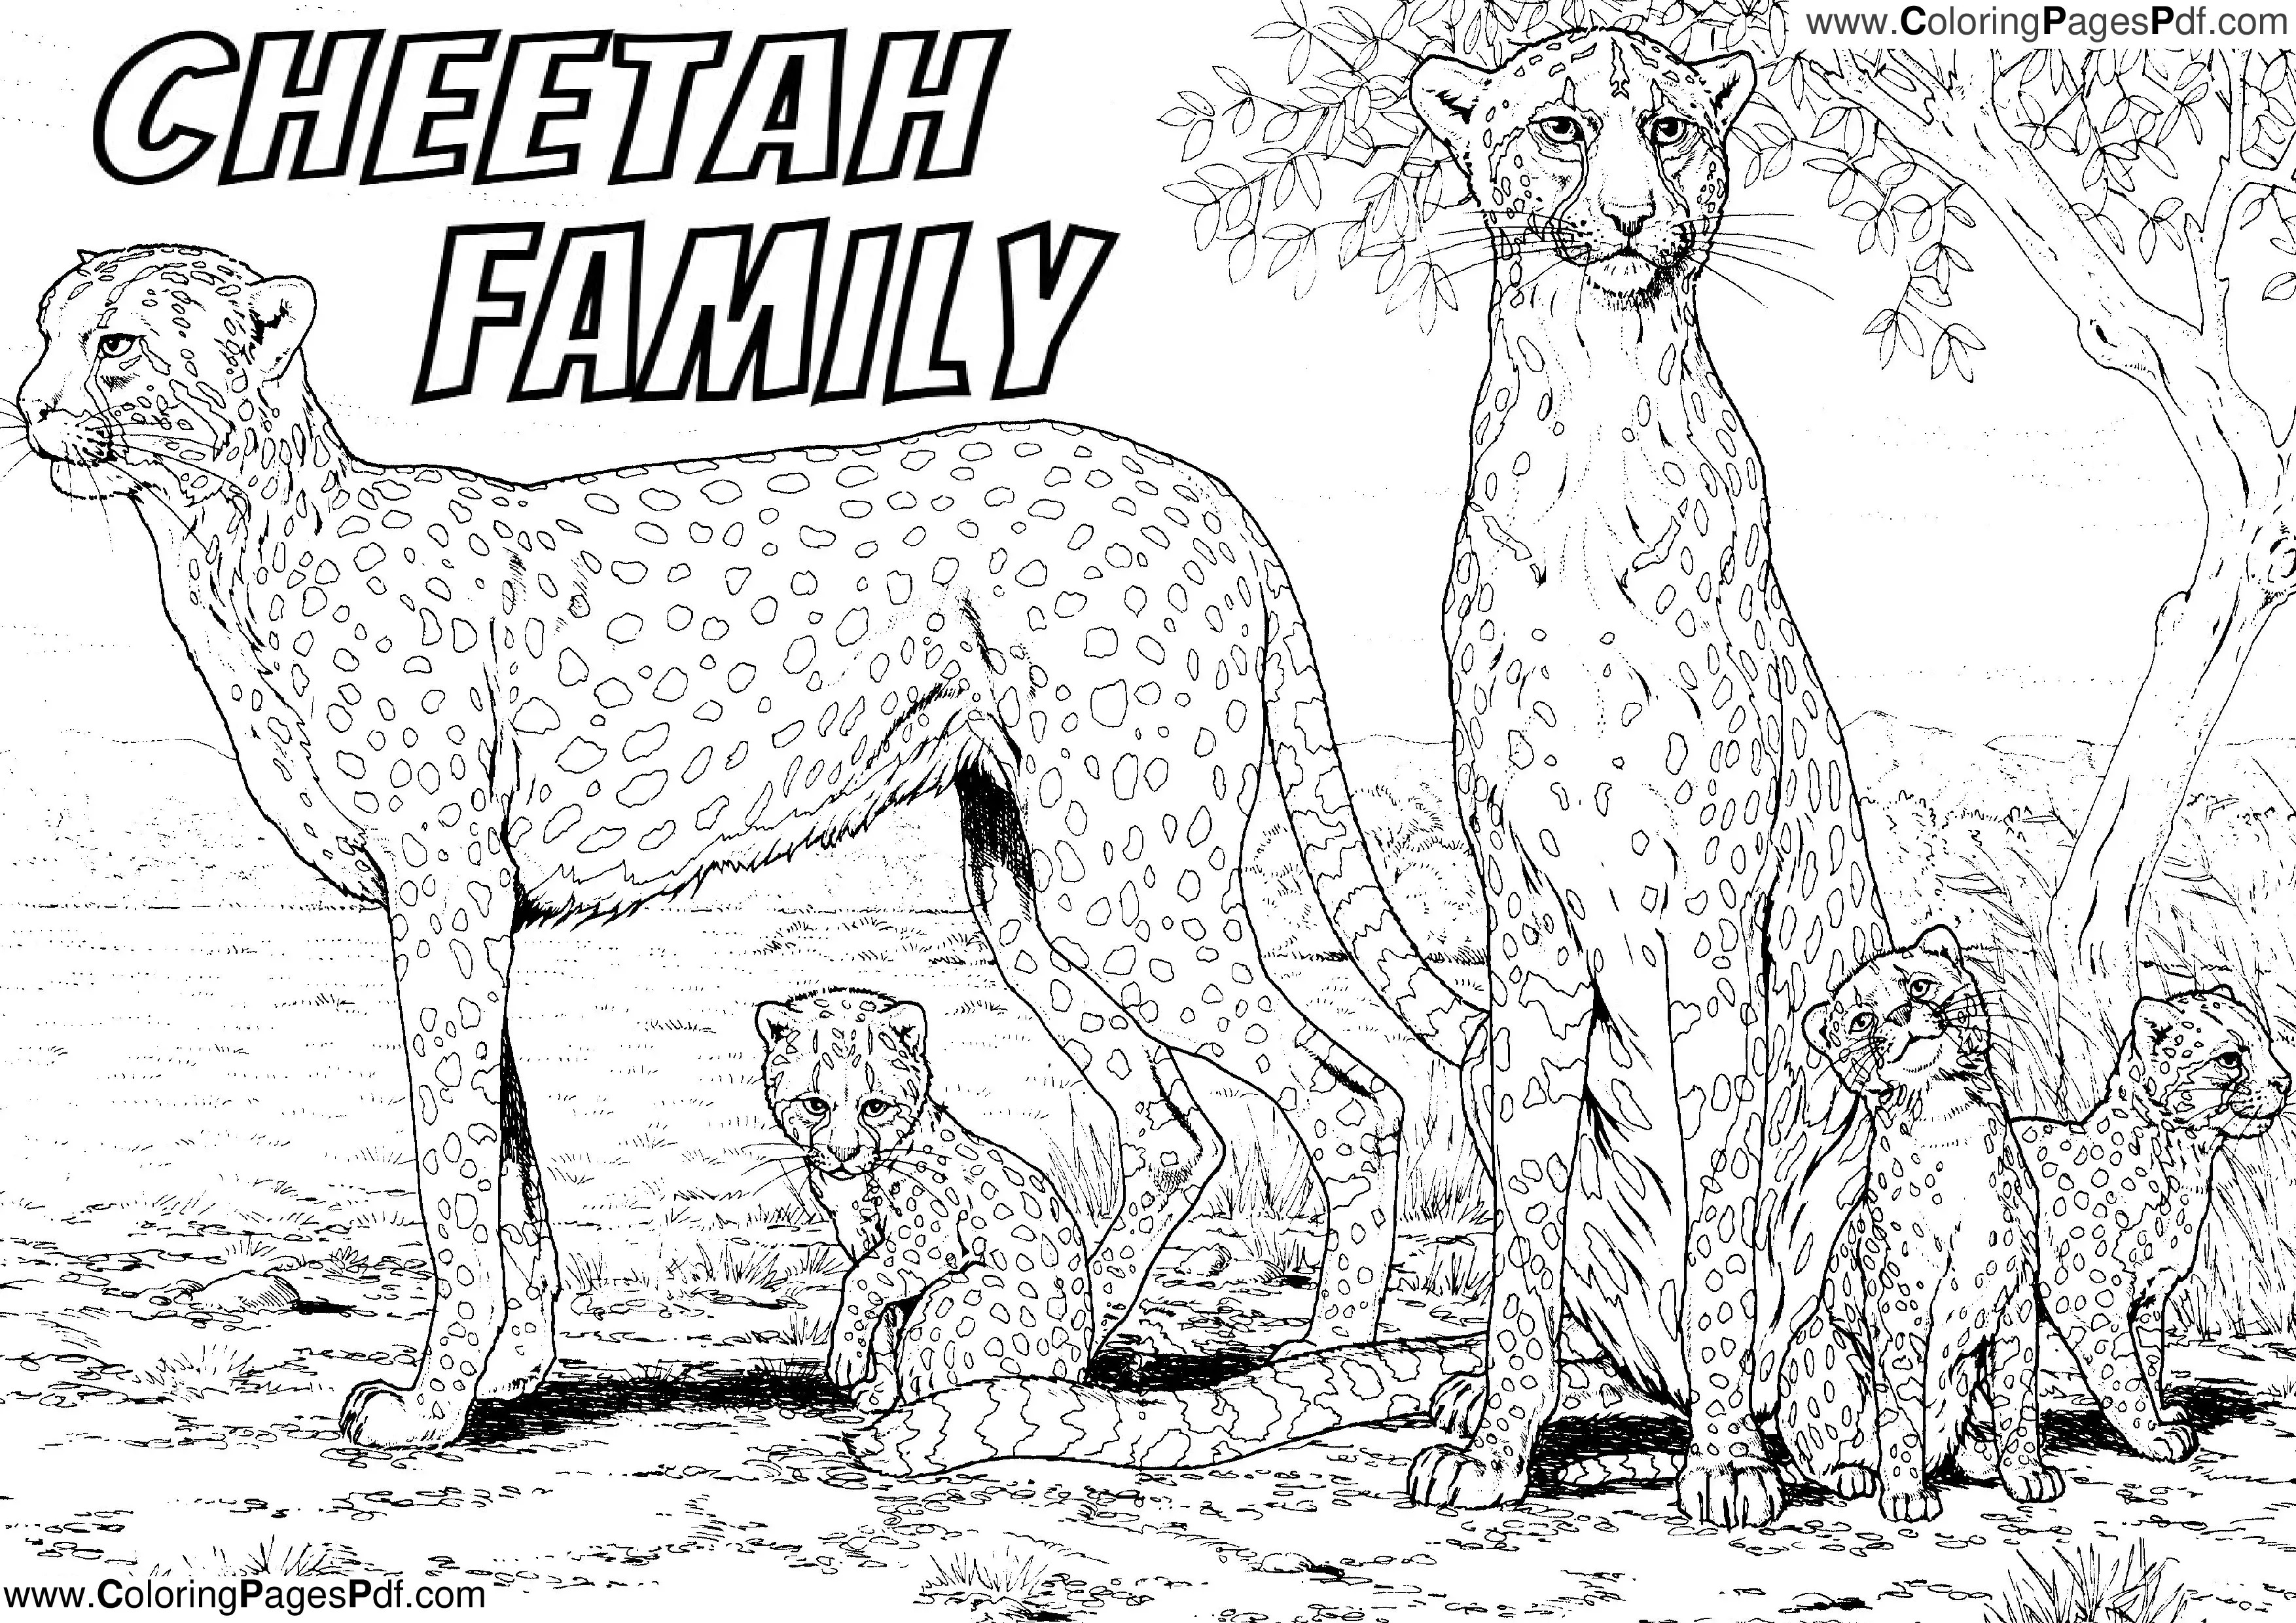 Cheetah coloring pages for adults